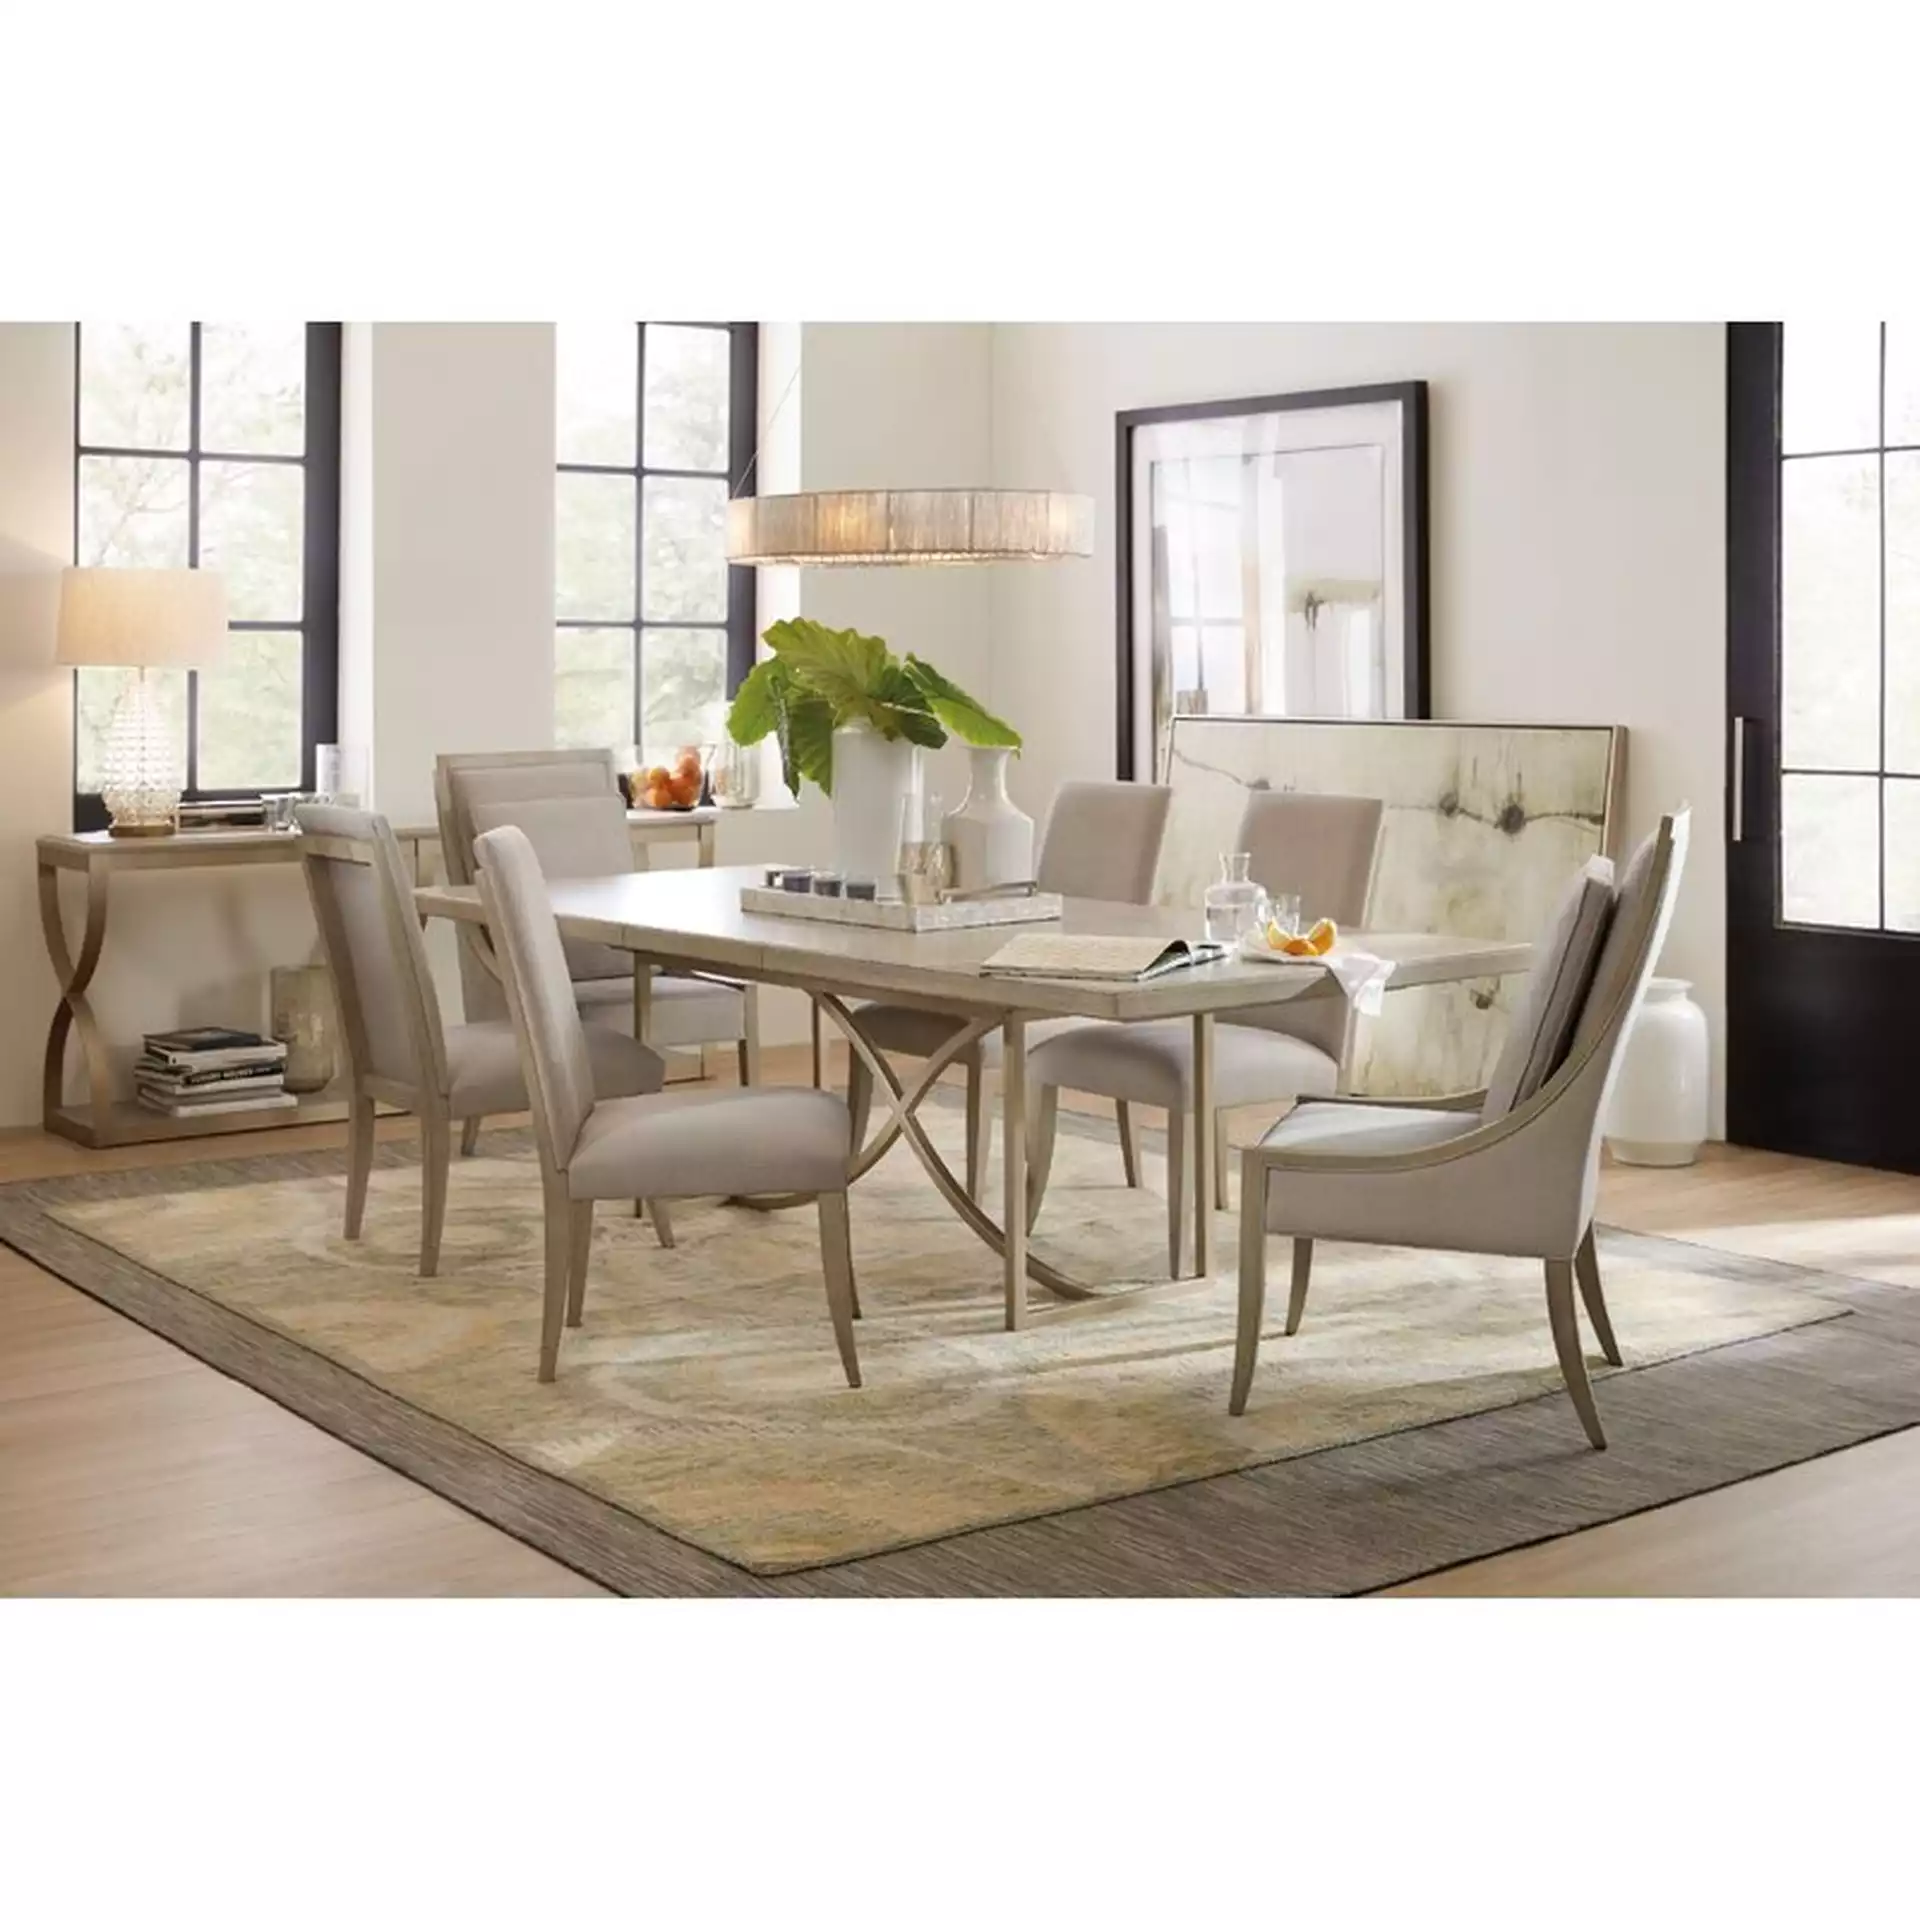 Elixir Rectangular Extendable Dining Table with Leaf